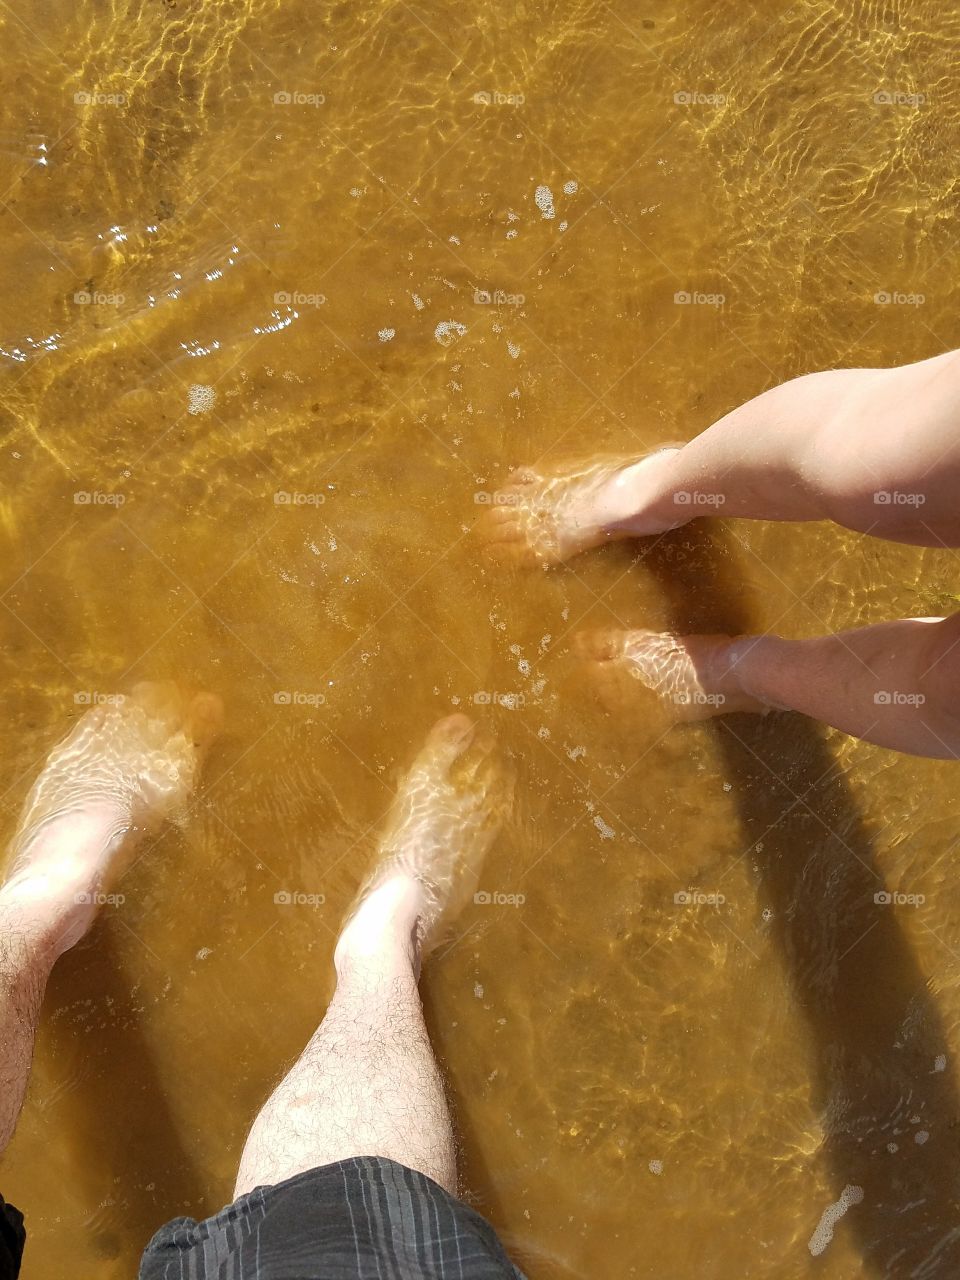 water feets